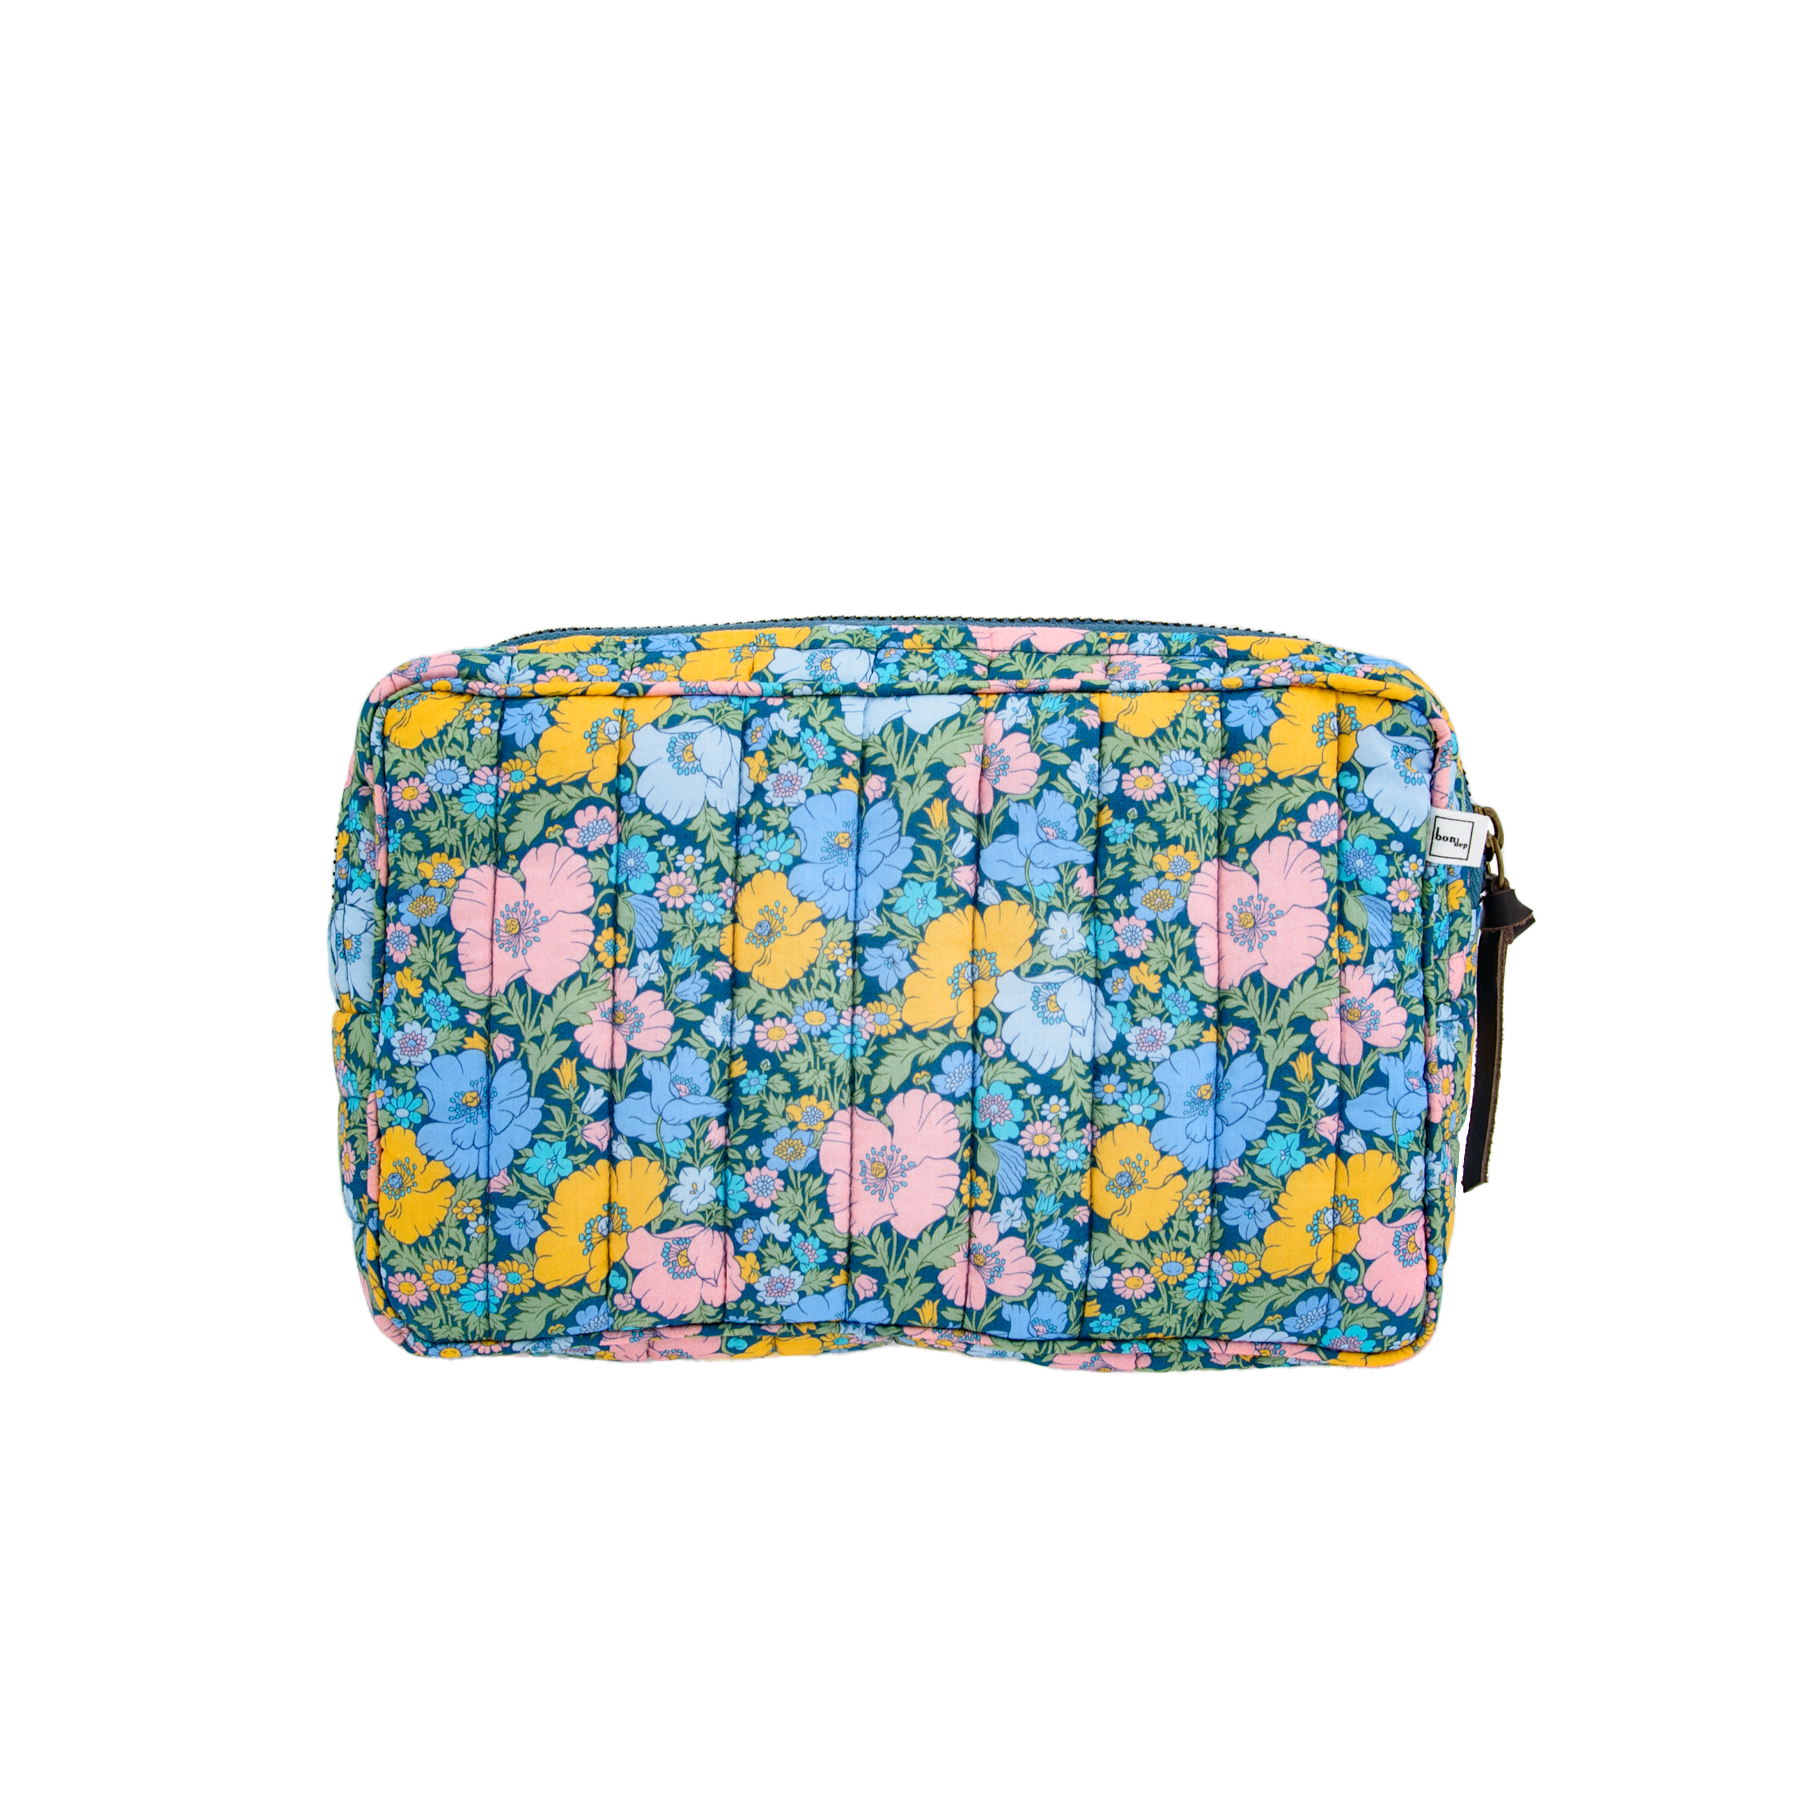 POUCH SMALL MW LIBERTY FABRIC MEADOW SONG BLUE